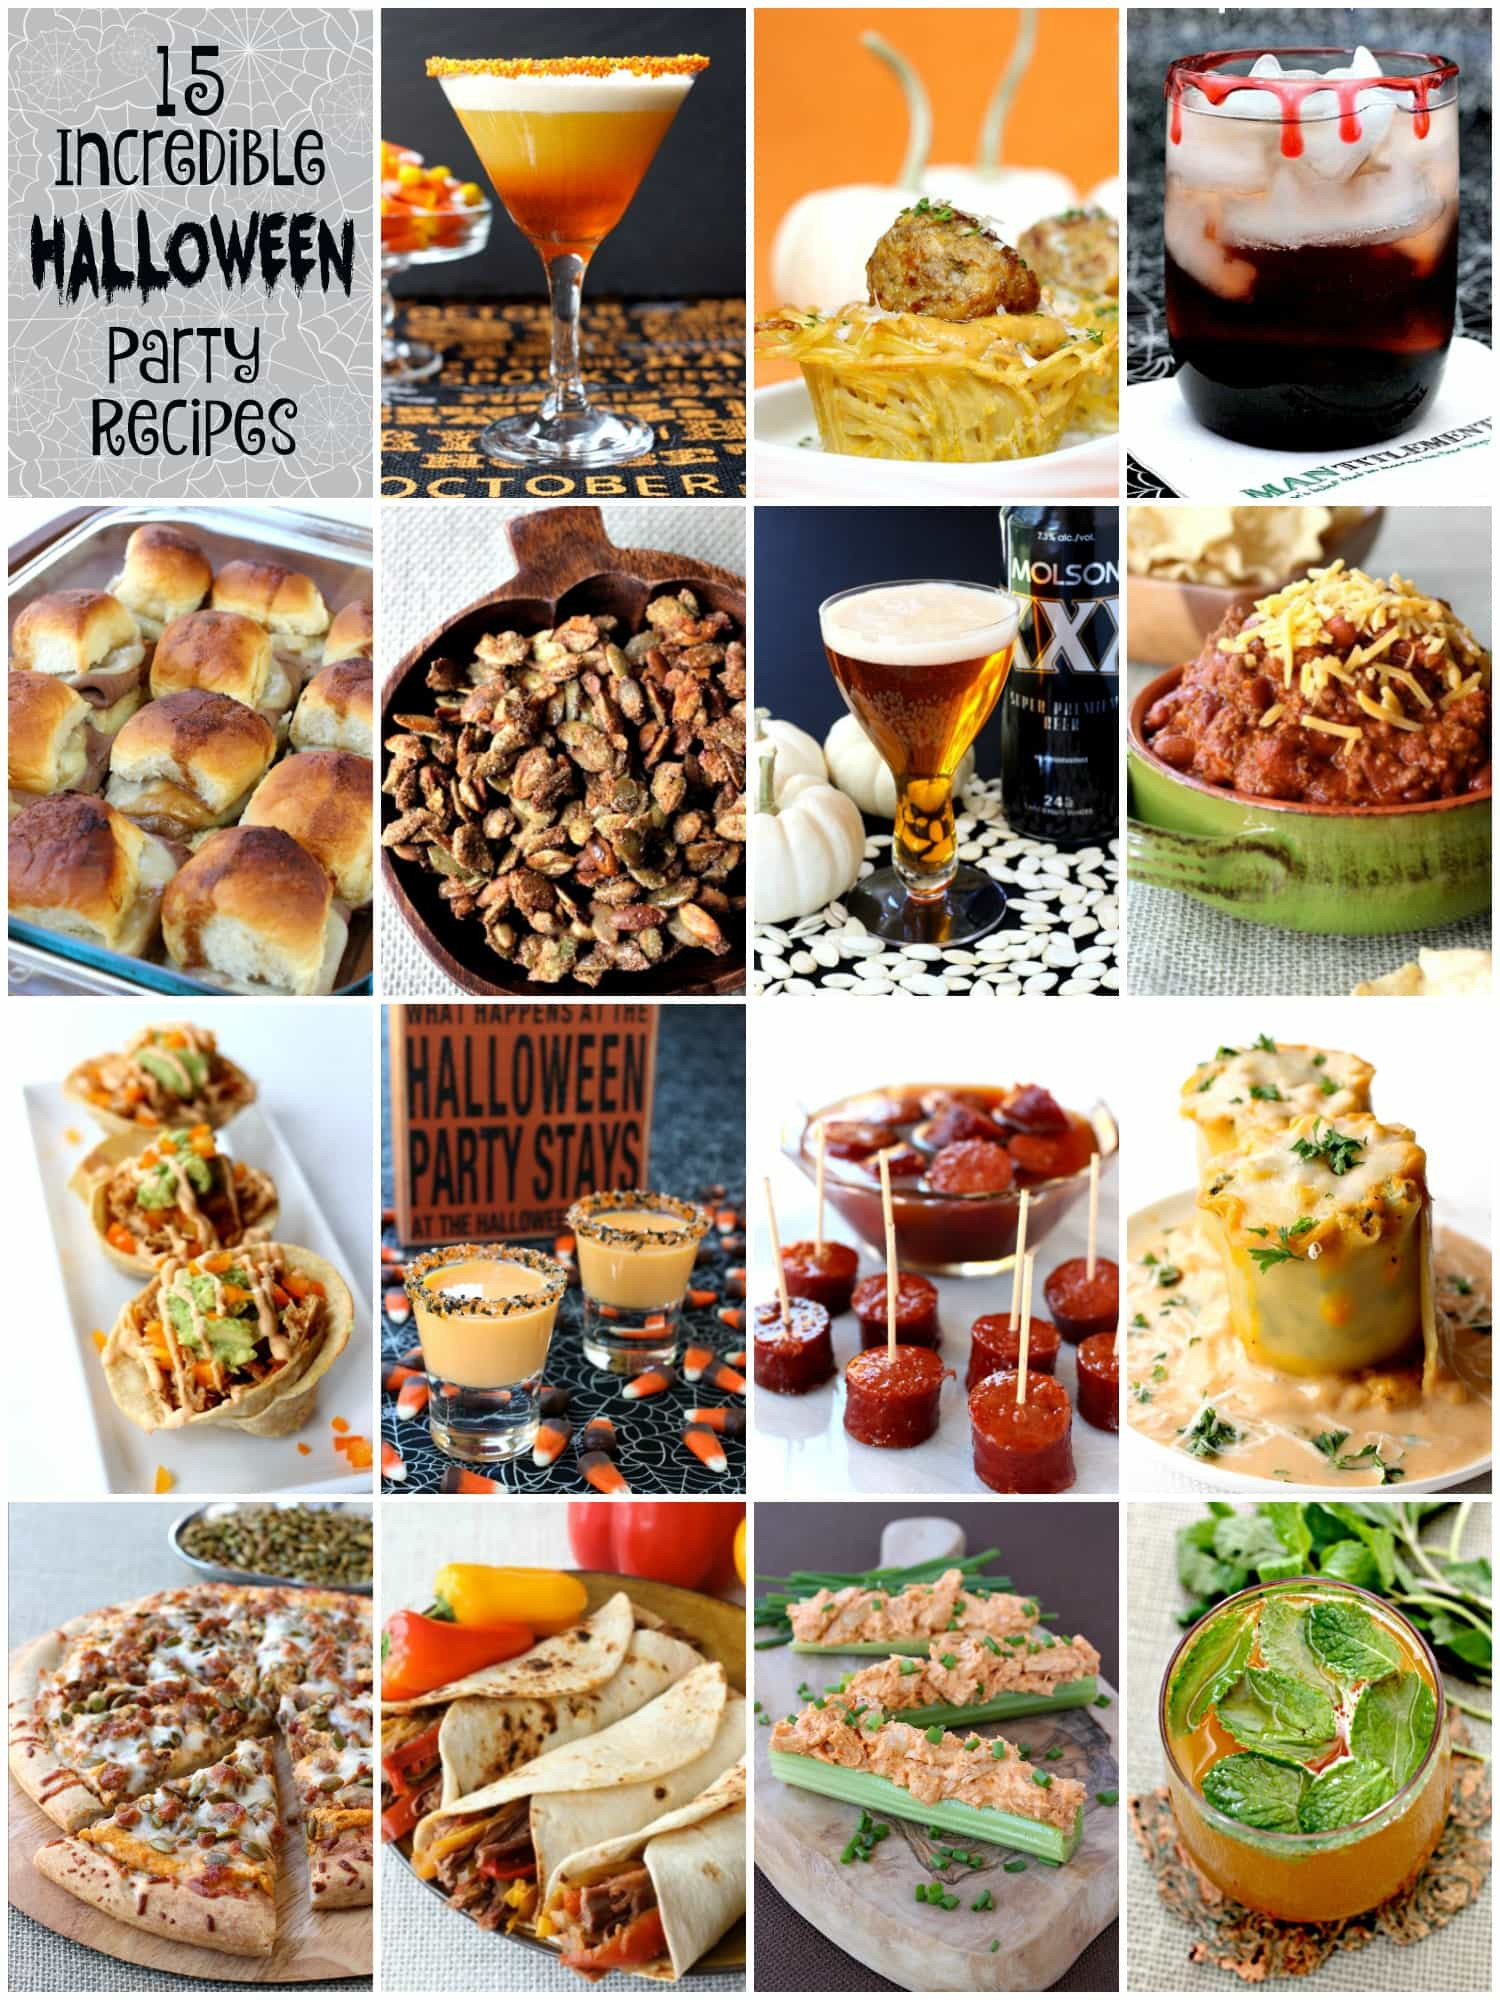 Adult Halloween Party Food Ideas
 15 Incredible Halloween Party Recipes